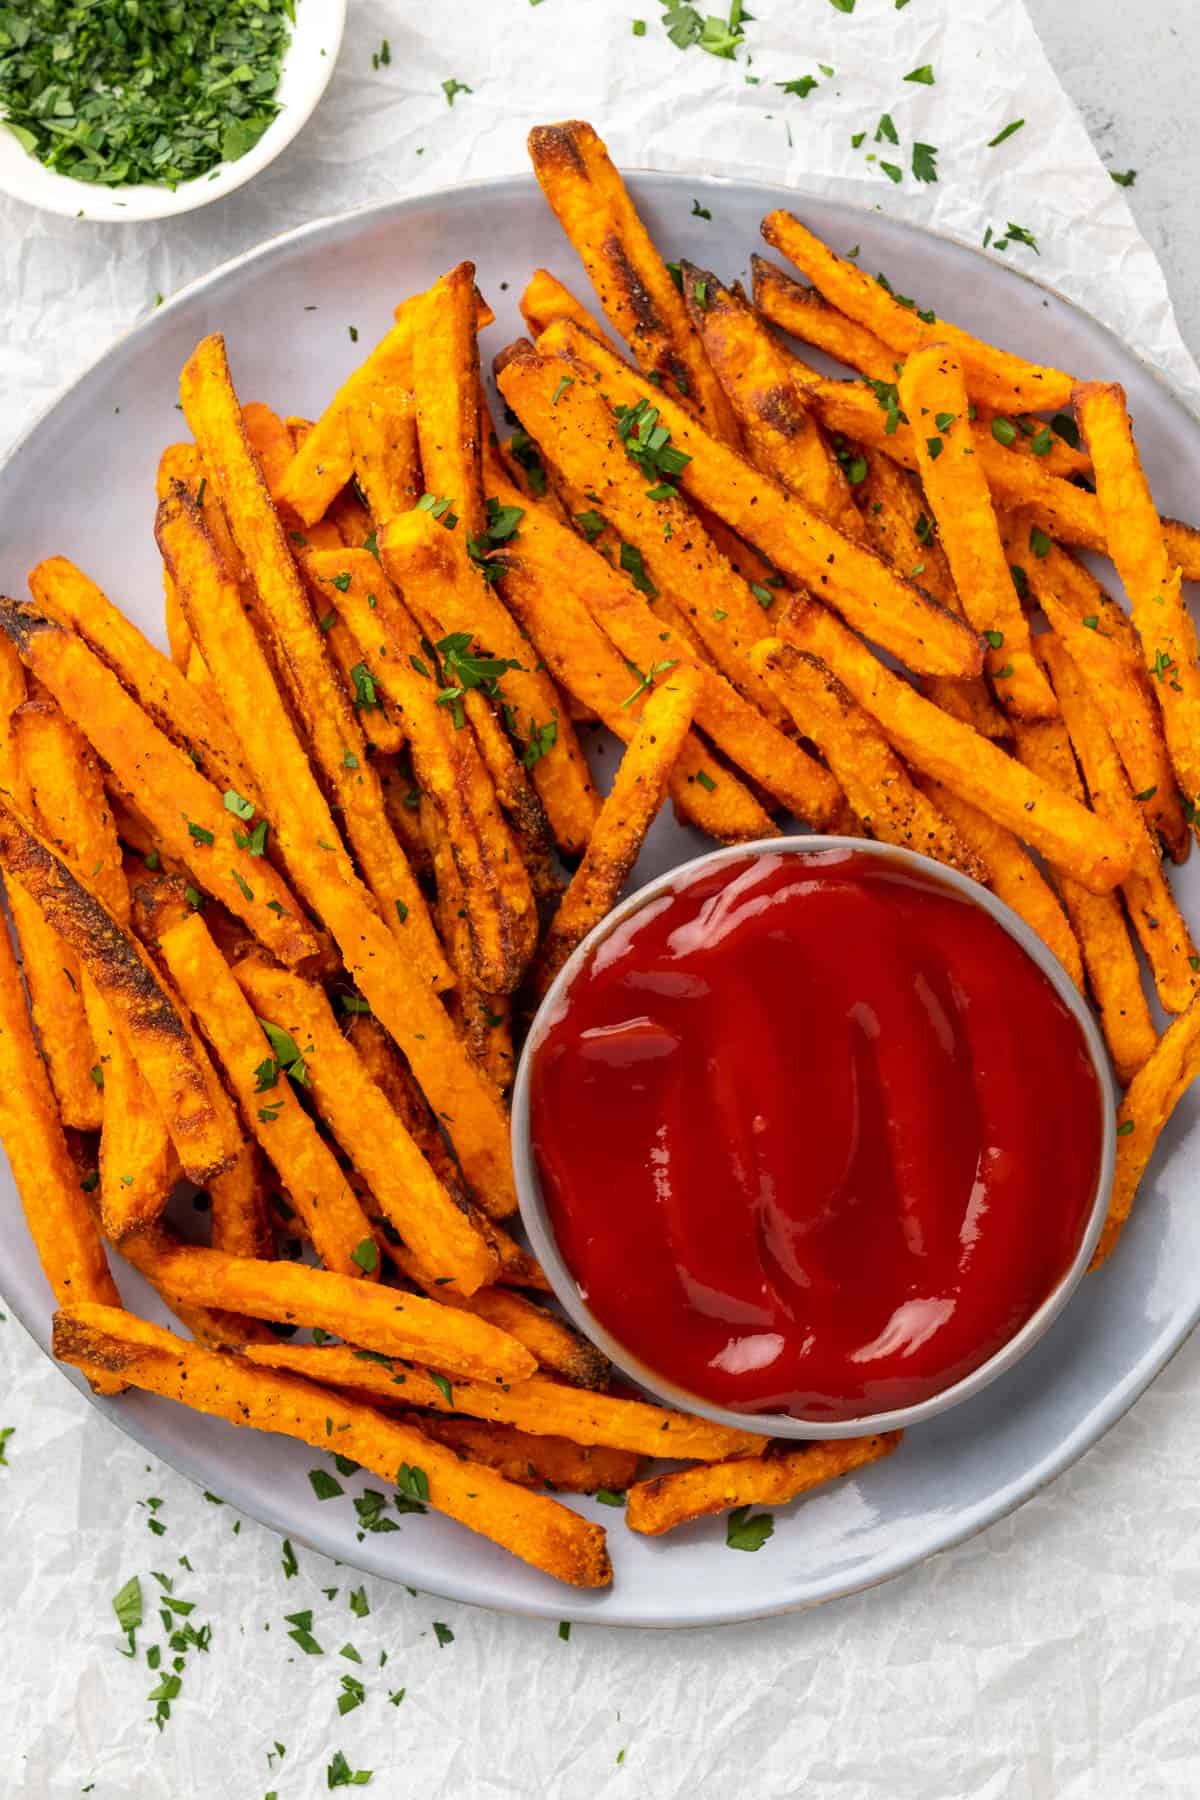 crispy sweet potato fries on a plate garnished with fresh herbs and served with ketchup